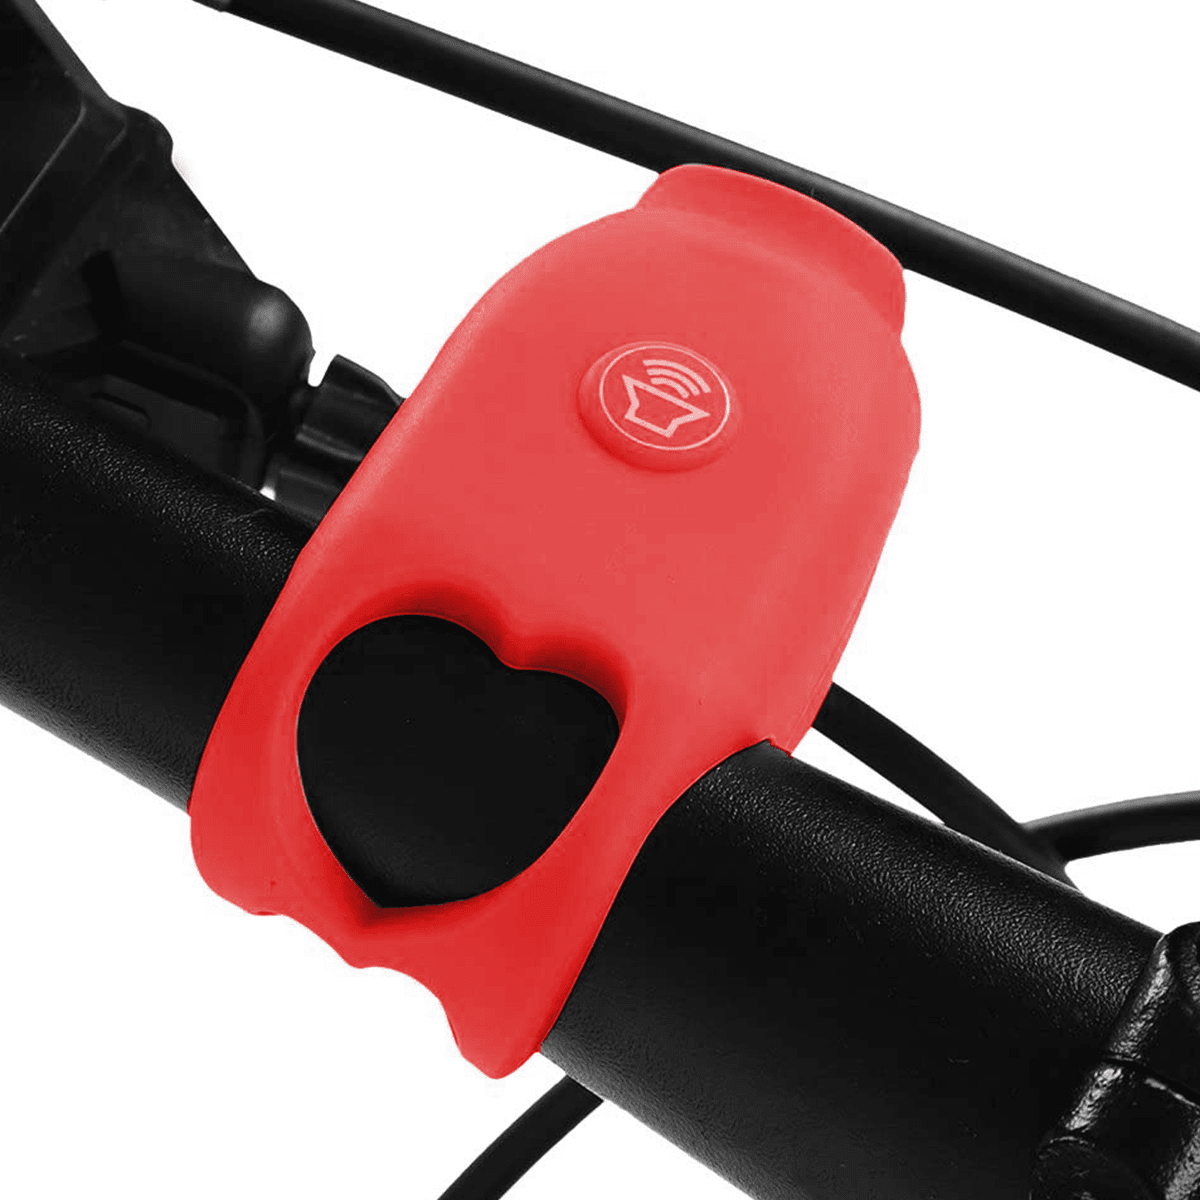 New Bike Bell Alloy Horn Sound Alarm Safety Cycling Super Loud Bike  Accessories Bike Horn Alarm Whistle Reminder(red) Fgao